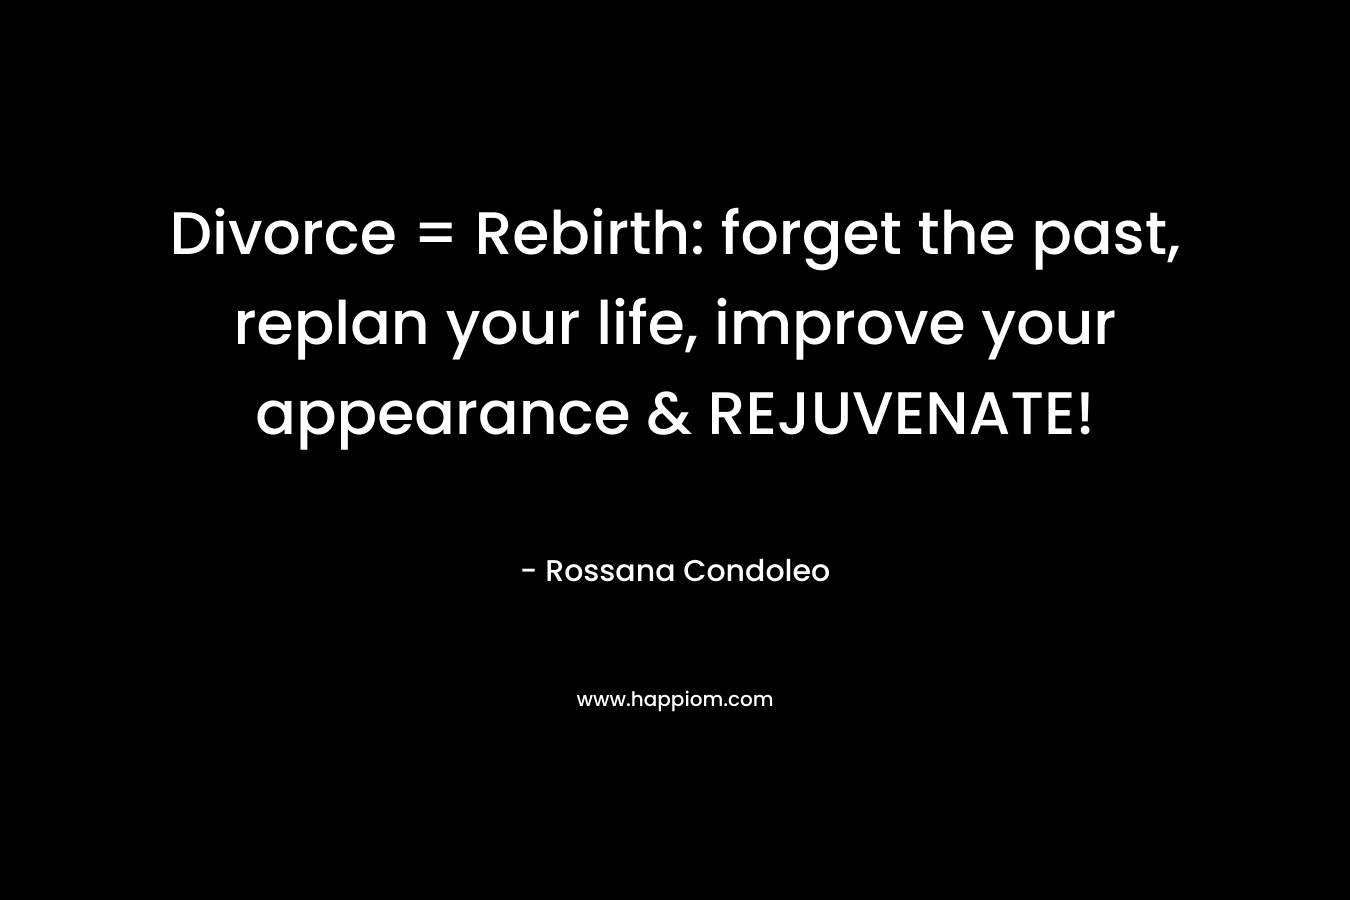 Divorce = Rebirth: forget the past, replan your life, improve your appearance & REJUVENATE! – Rossana Condoleo